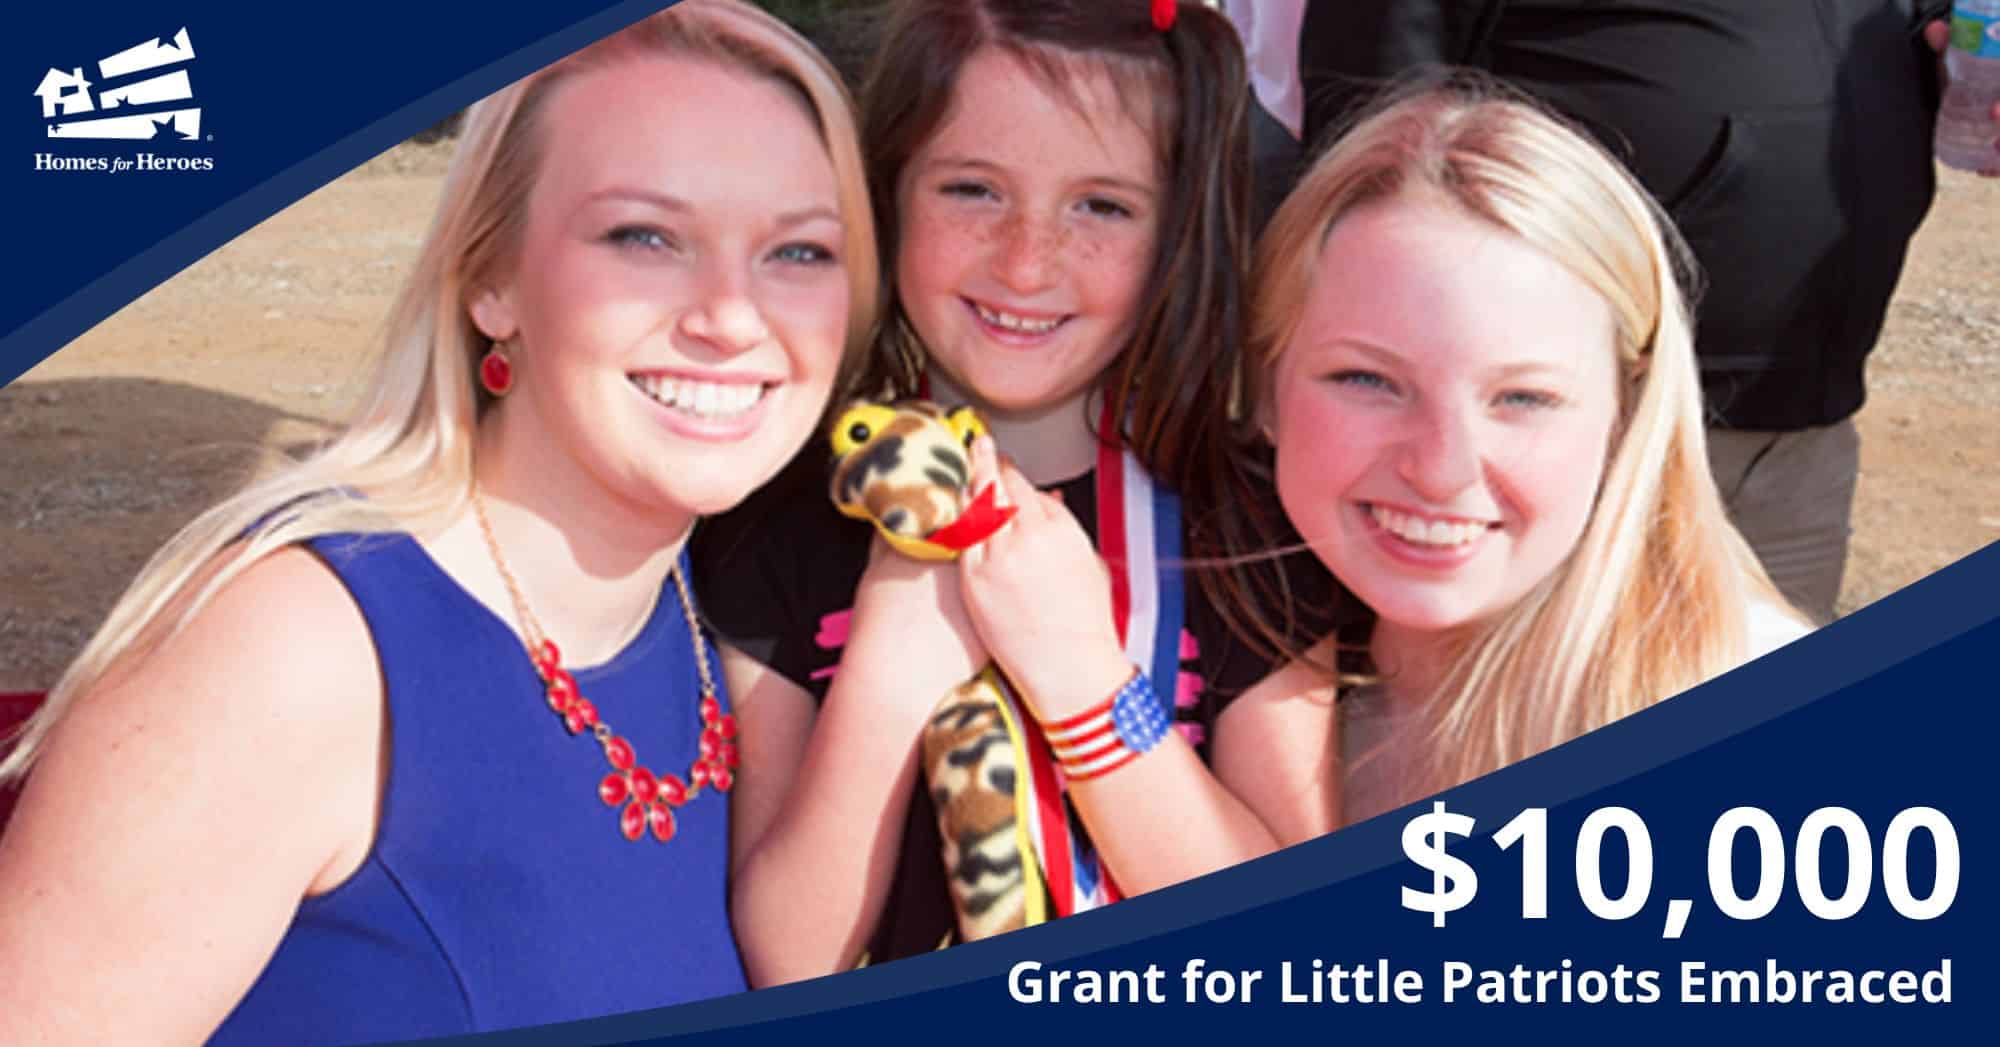 three children participating in Little Patriots Embraced event Homes for Heroes Foundation awards 10000 grant